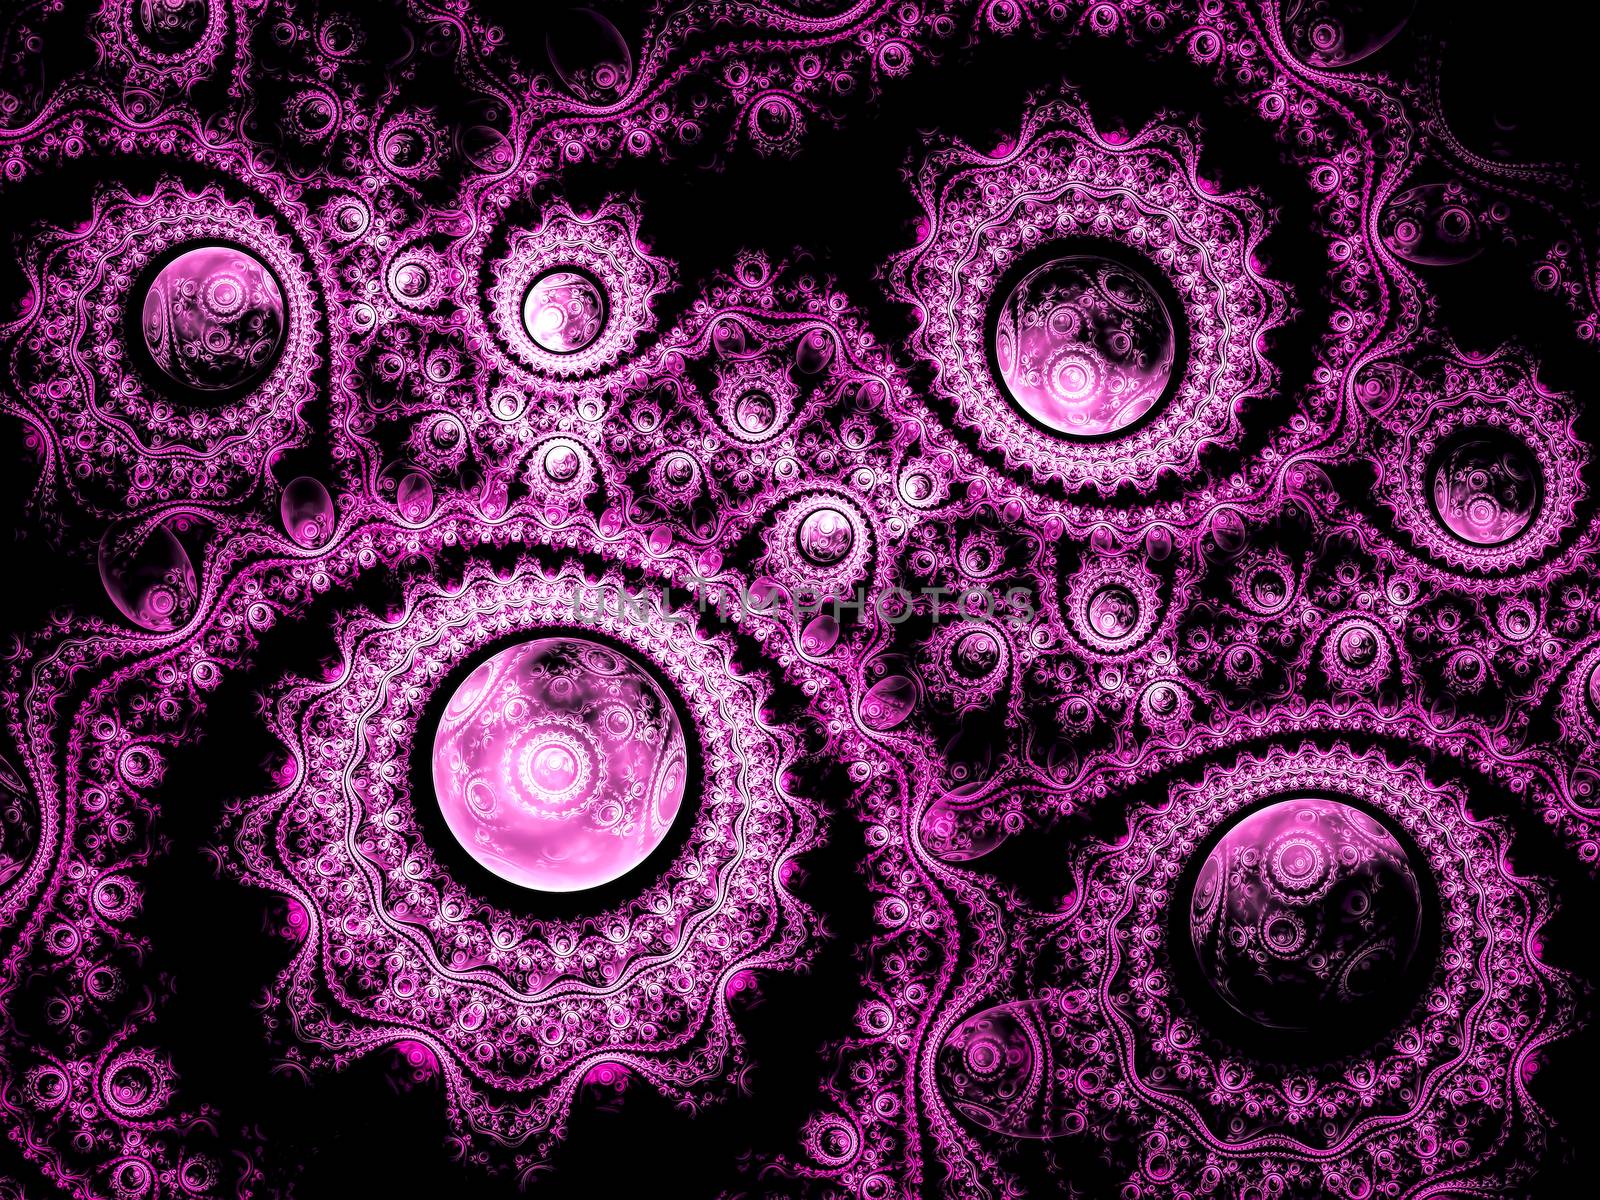 Abstract purple ornament -  digitally generated image by olgasalt